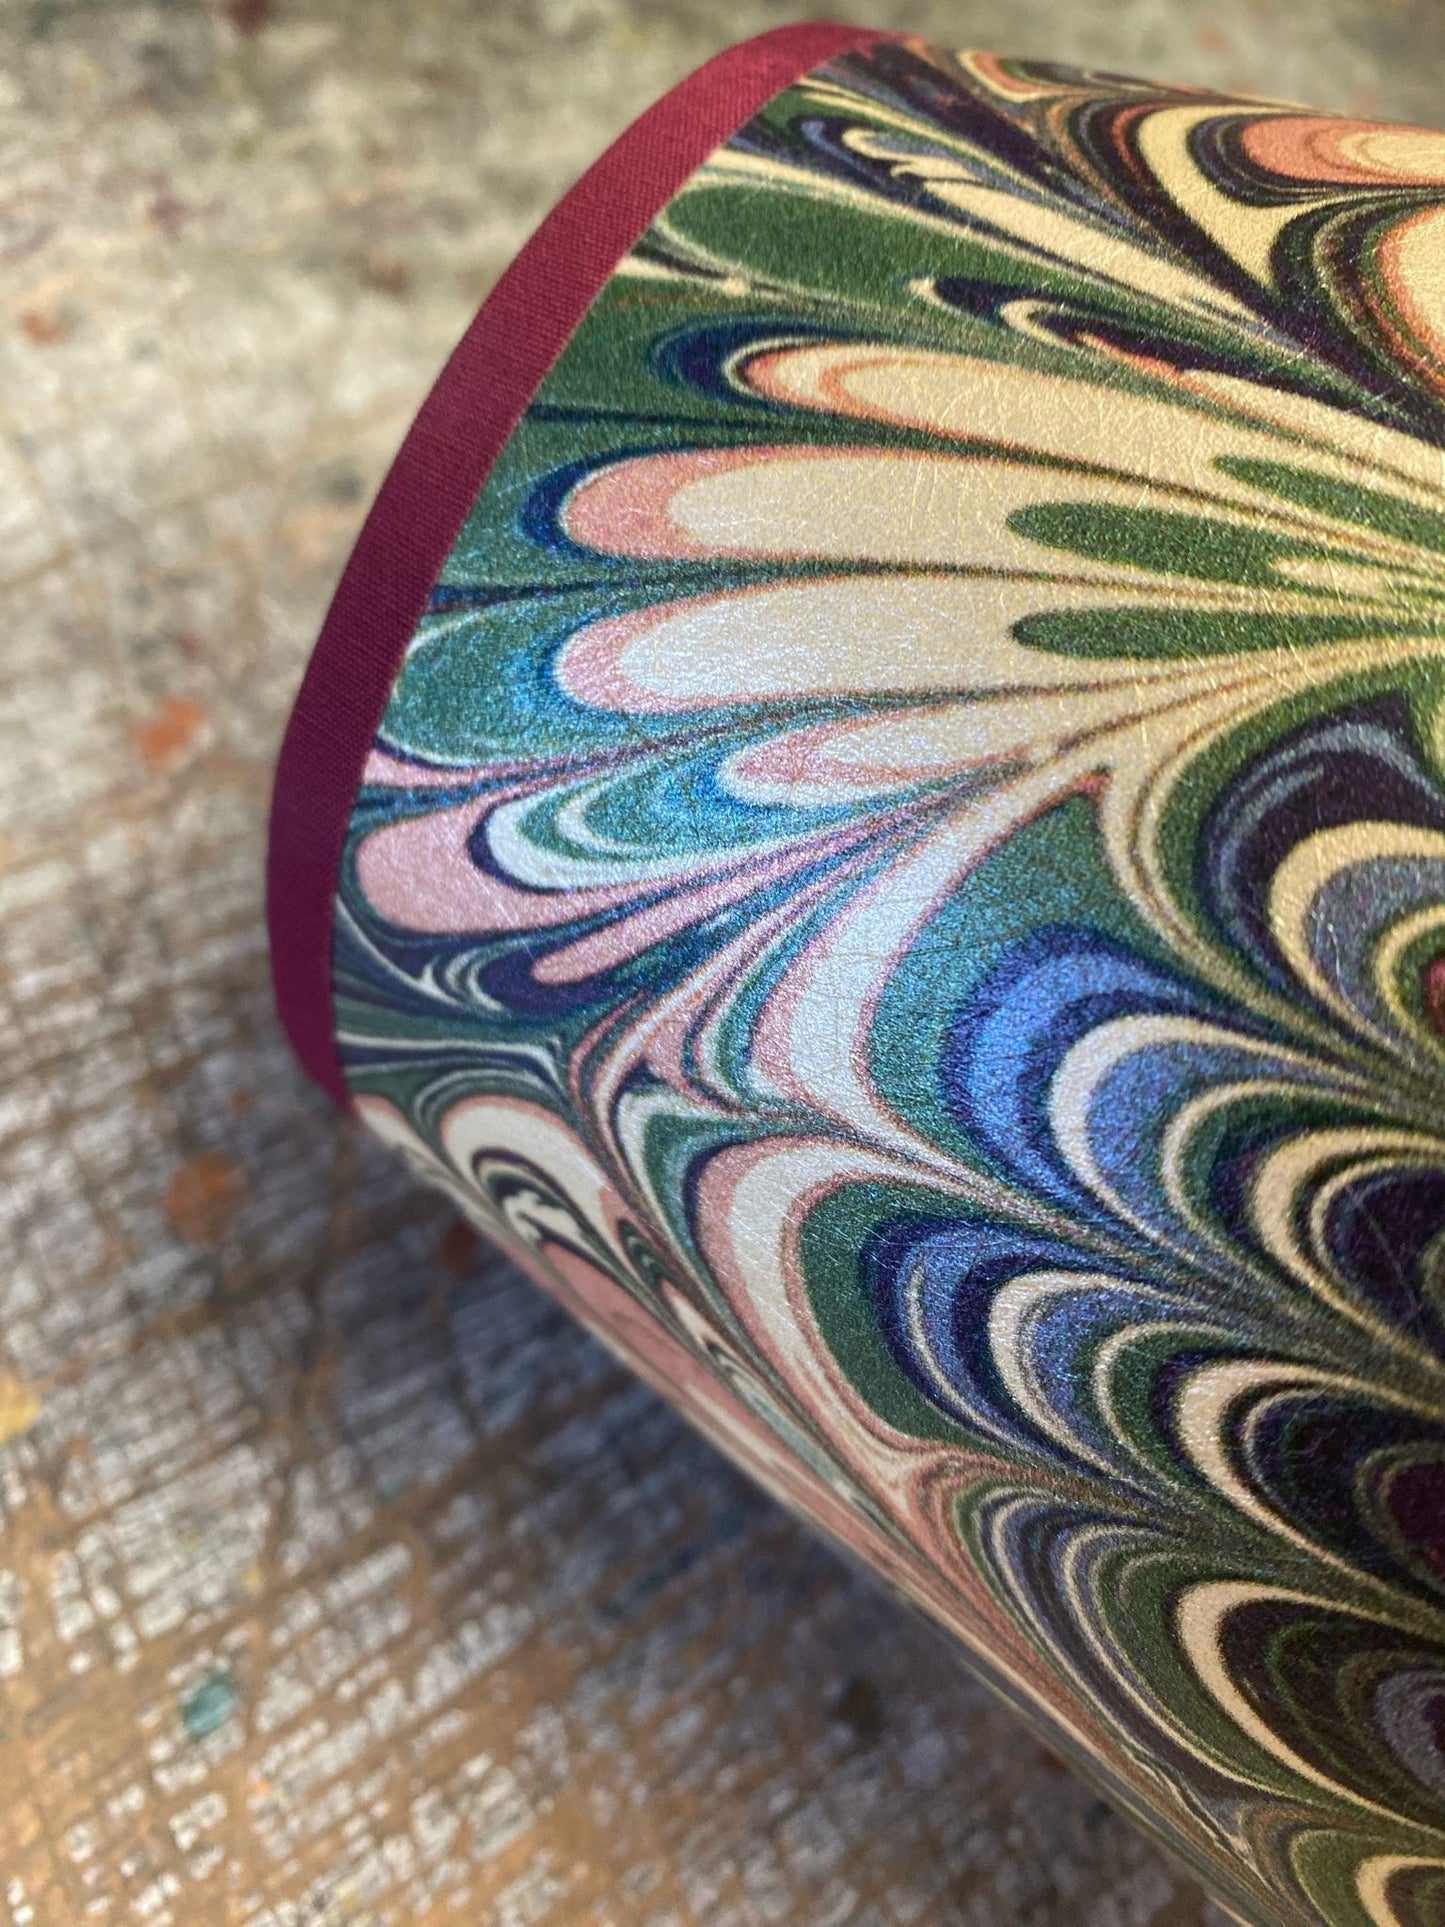 In Stock: House of Amitié Marbled Paper Lampshade - Serpentine Summer - Empire - Size Small